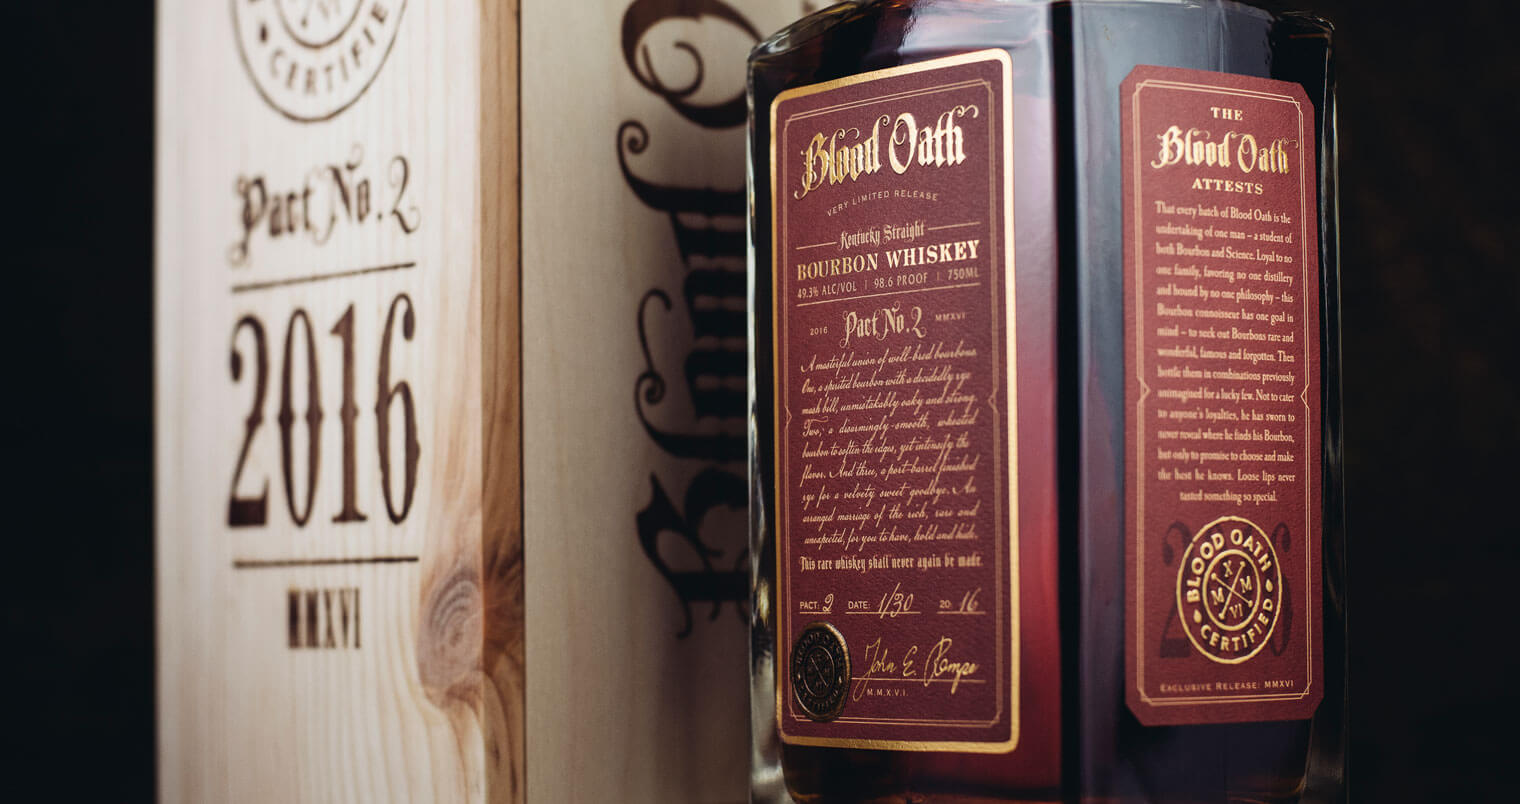 Luxco Releases Blood Oath Pact No. 2, featured brands, featured image